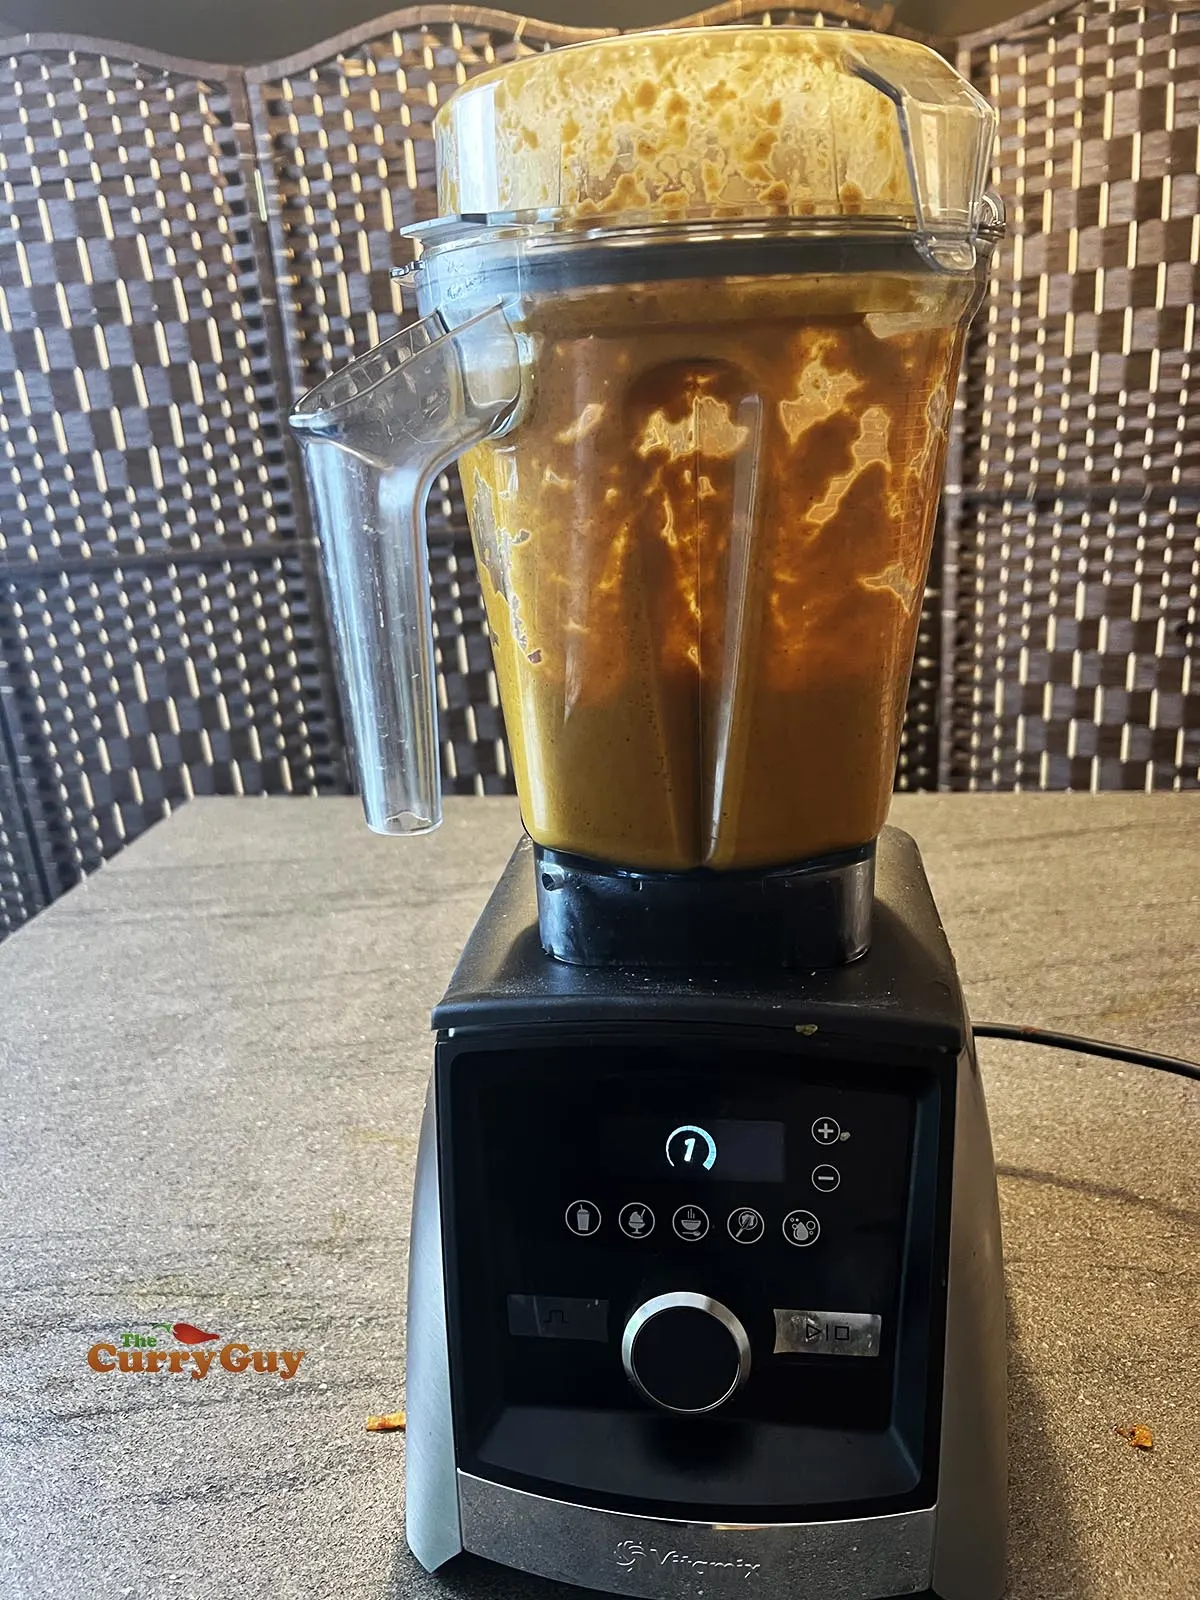 Blending curry house style sauce until smooth